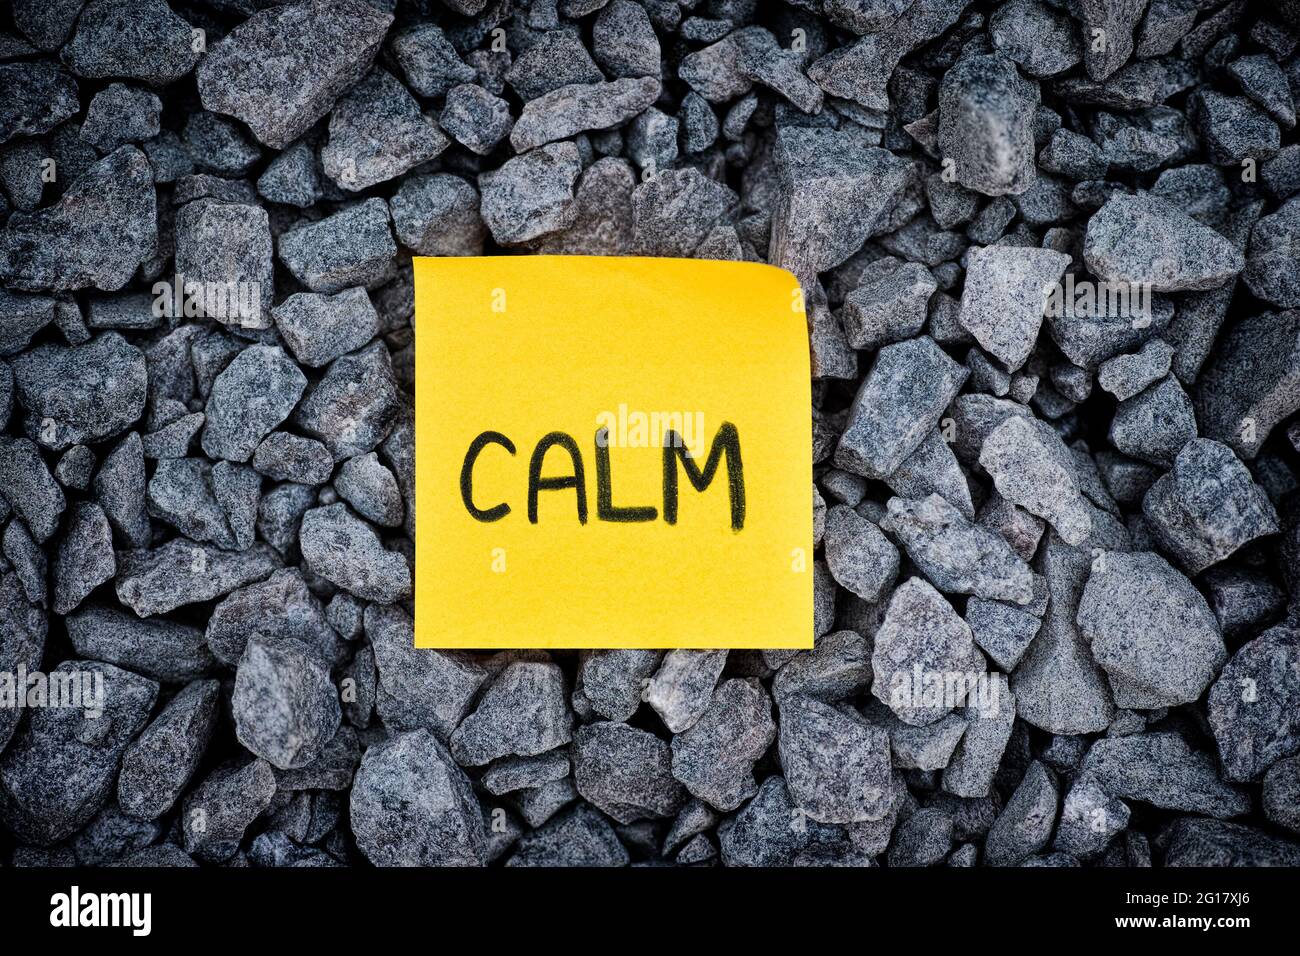 A yellow paper note with 'Calm' written on it lying on a granite background. Close up. Stock Photo